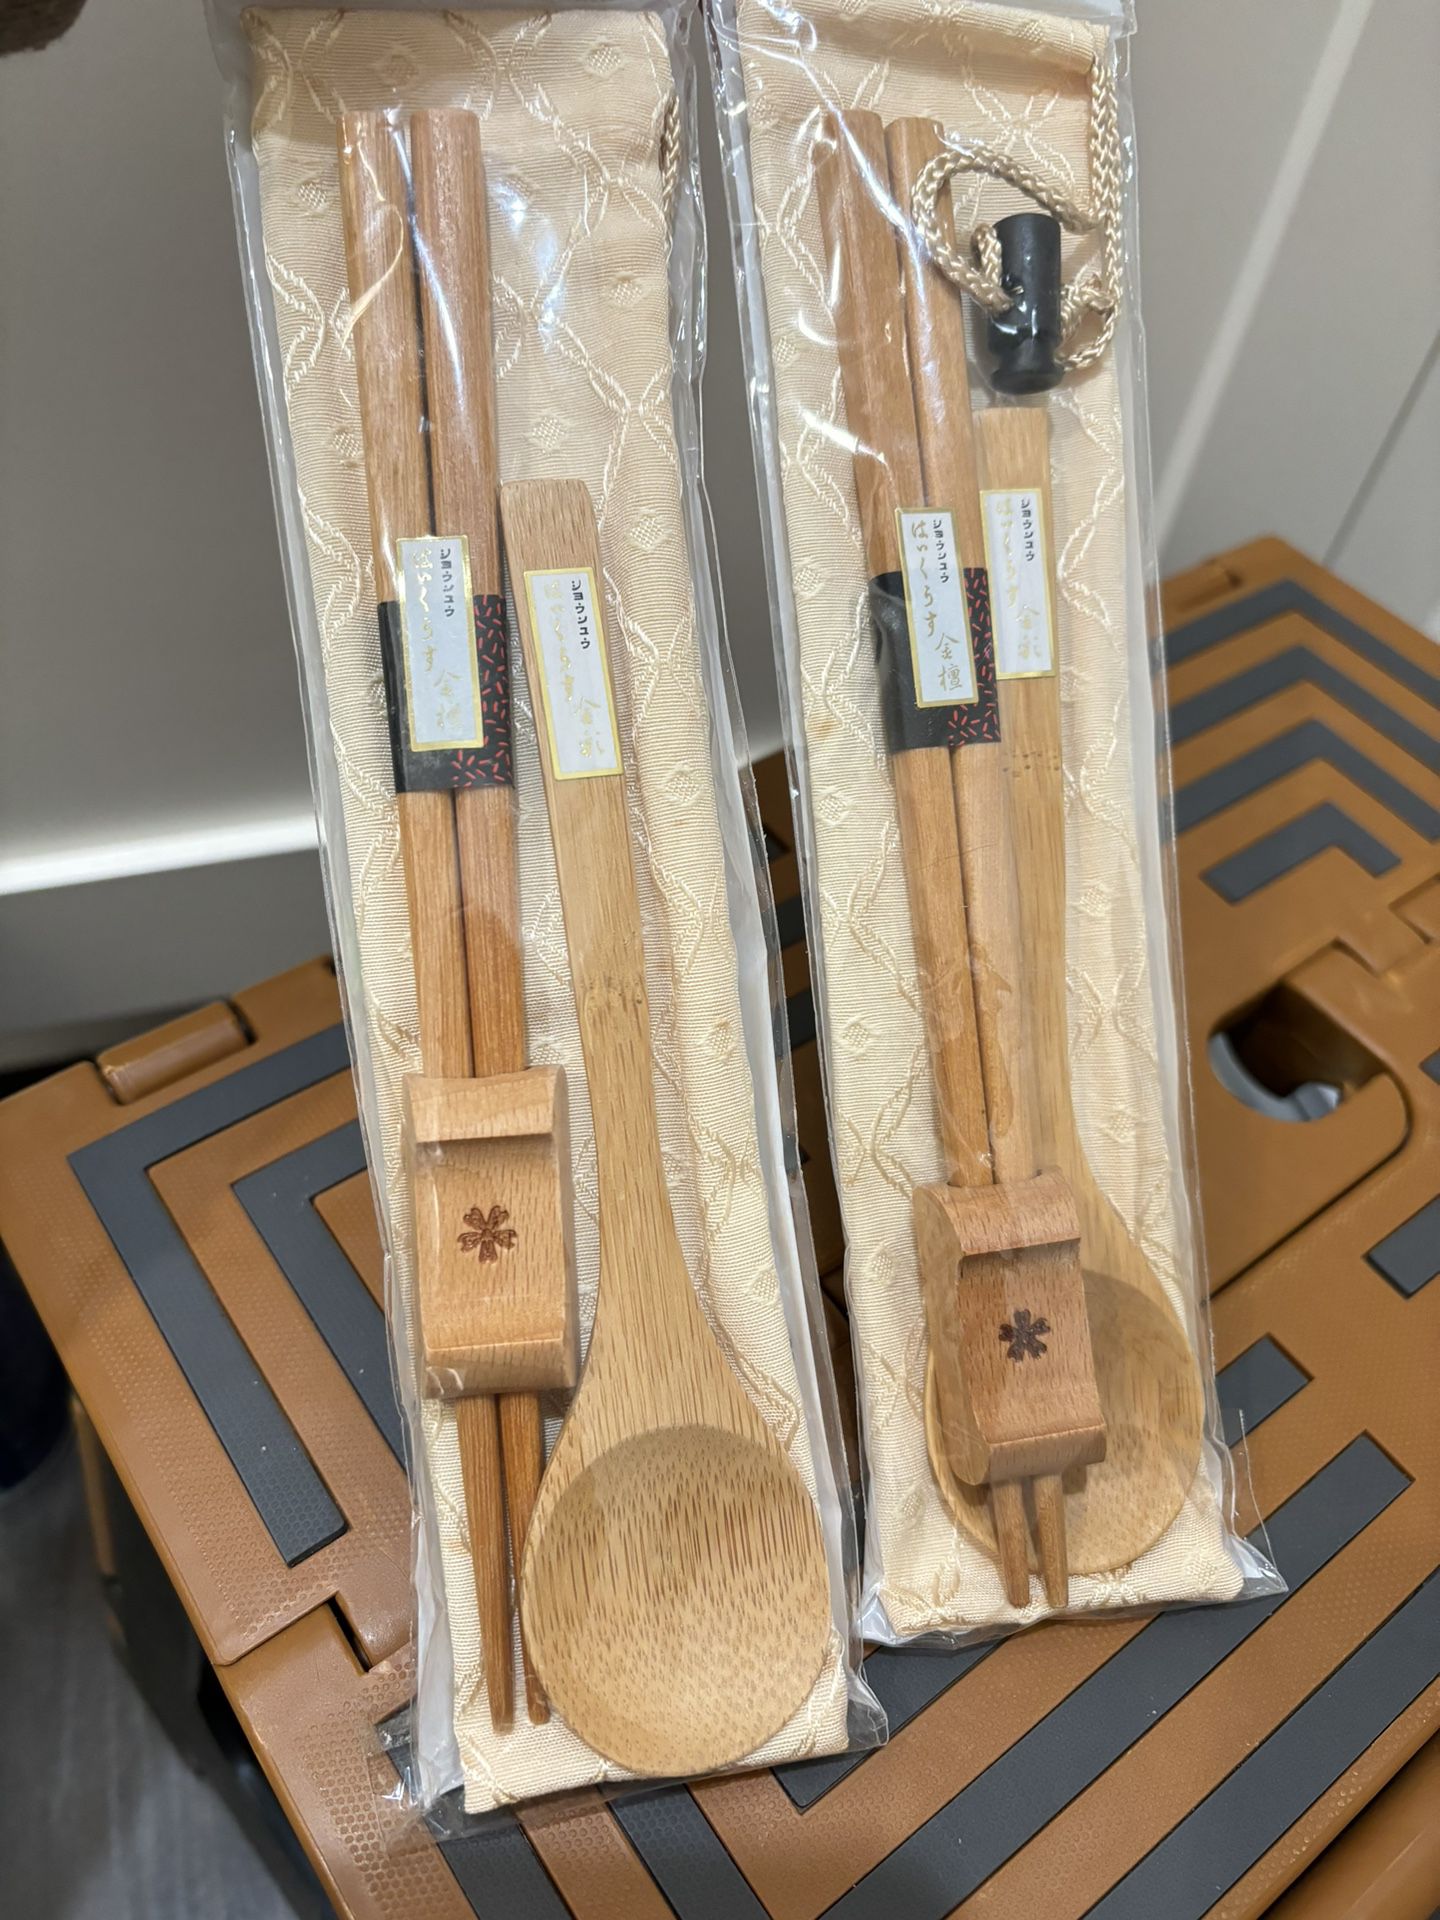 New  Bamboo Chopsticks $10 for two groups